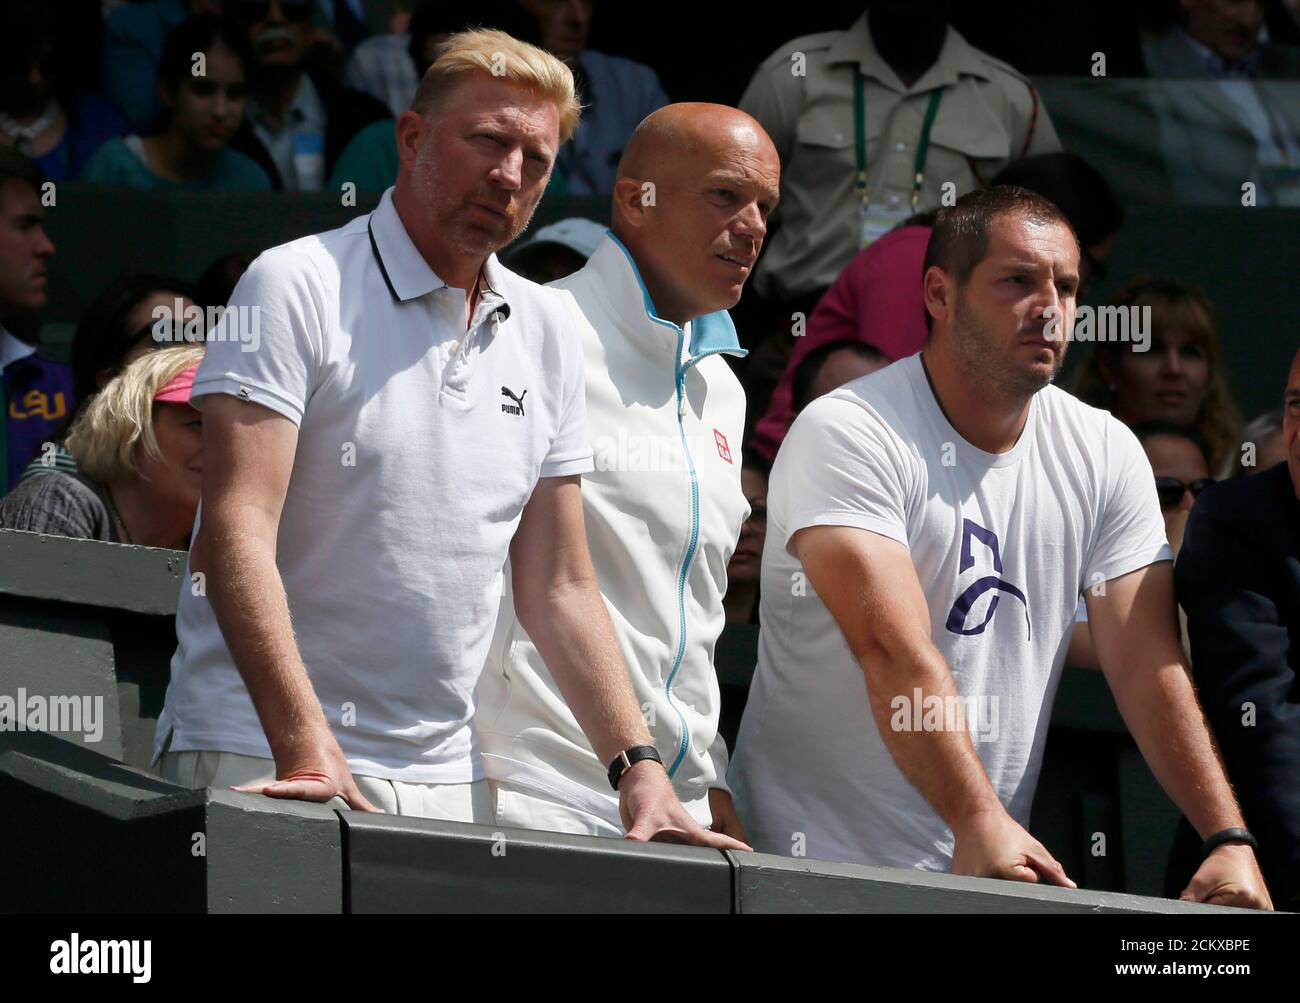 Boris Becker and other members of the coaching team of Novak Djokovic of Serbia stand and react after he fell during his men's singles tennis match against Gilles Simon of France on Centre Court at the Wimbledon Tennis Championships in London June 27, 2014. REUTERS/Stefan Wermuth (BRITAIN  - Tags: SPORT TENNIS) Stock Photo